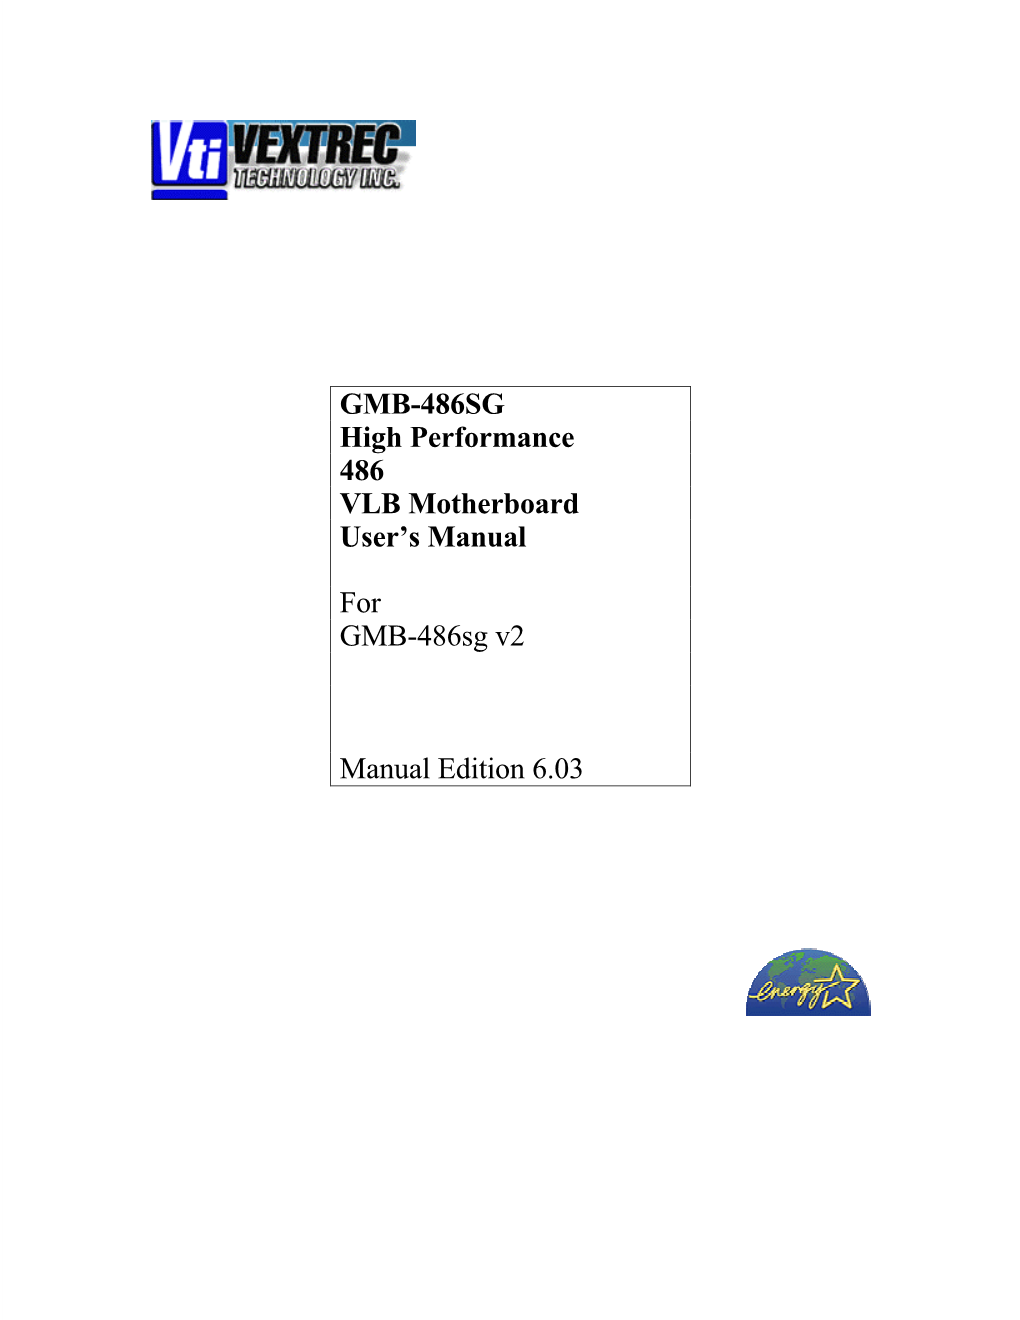 GMB-486SG High Performance 486 VLB Motherboard User's Manual